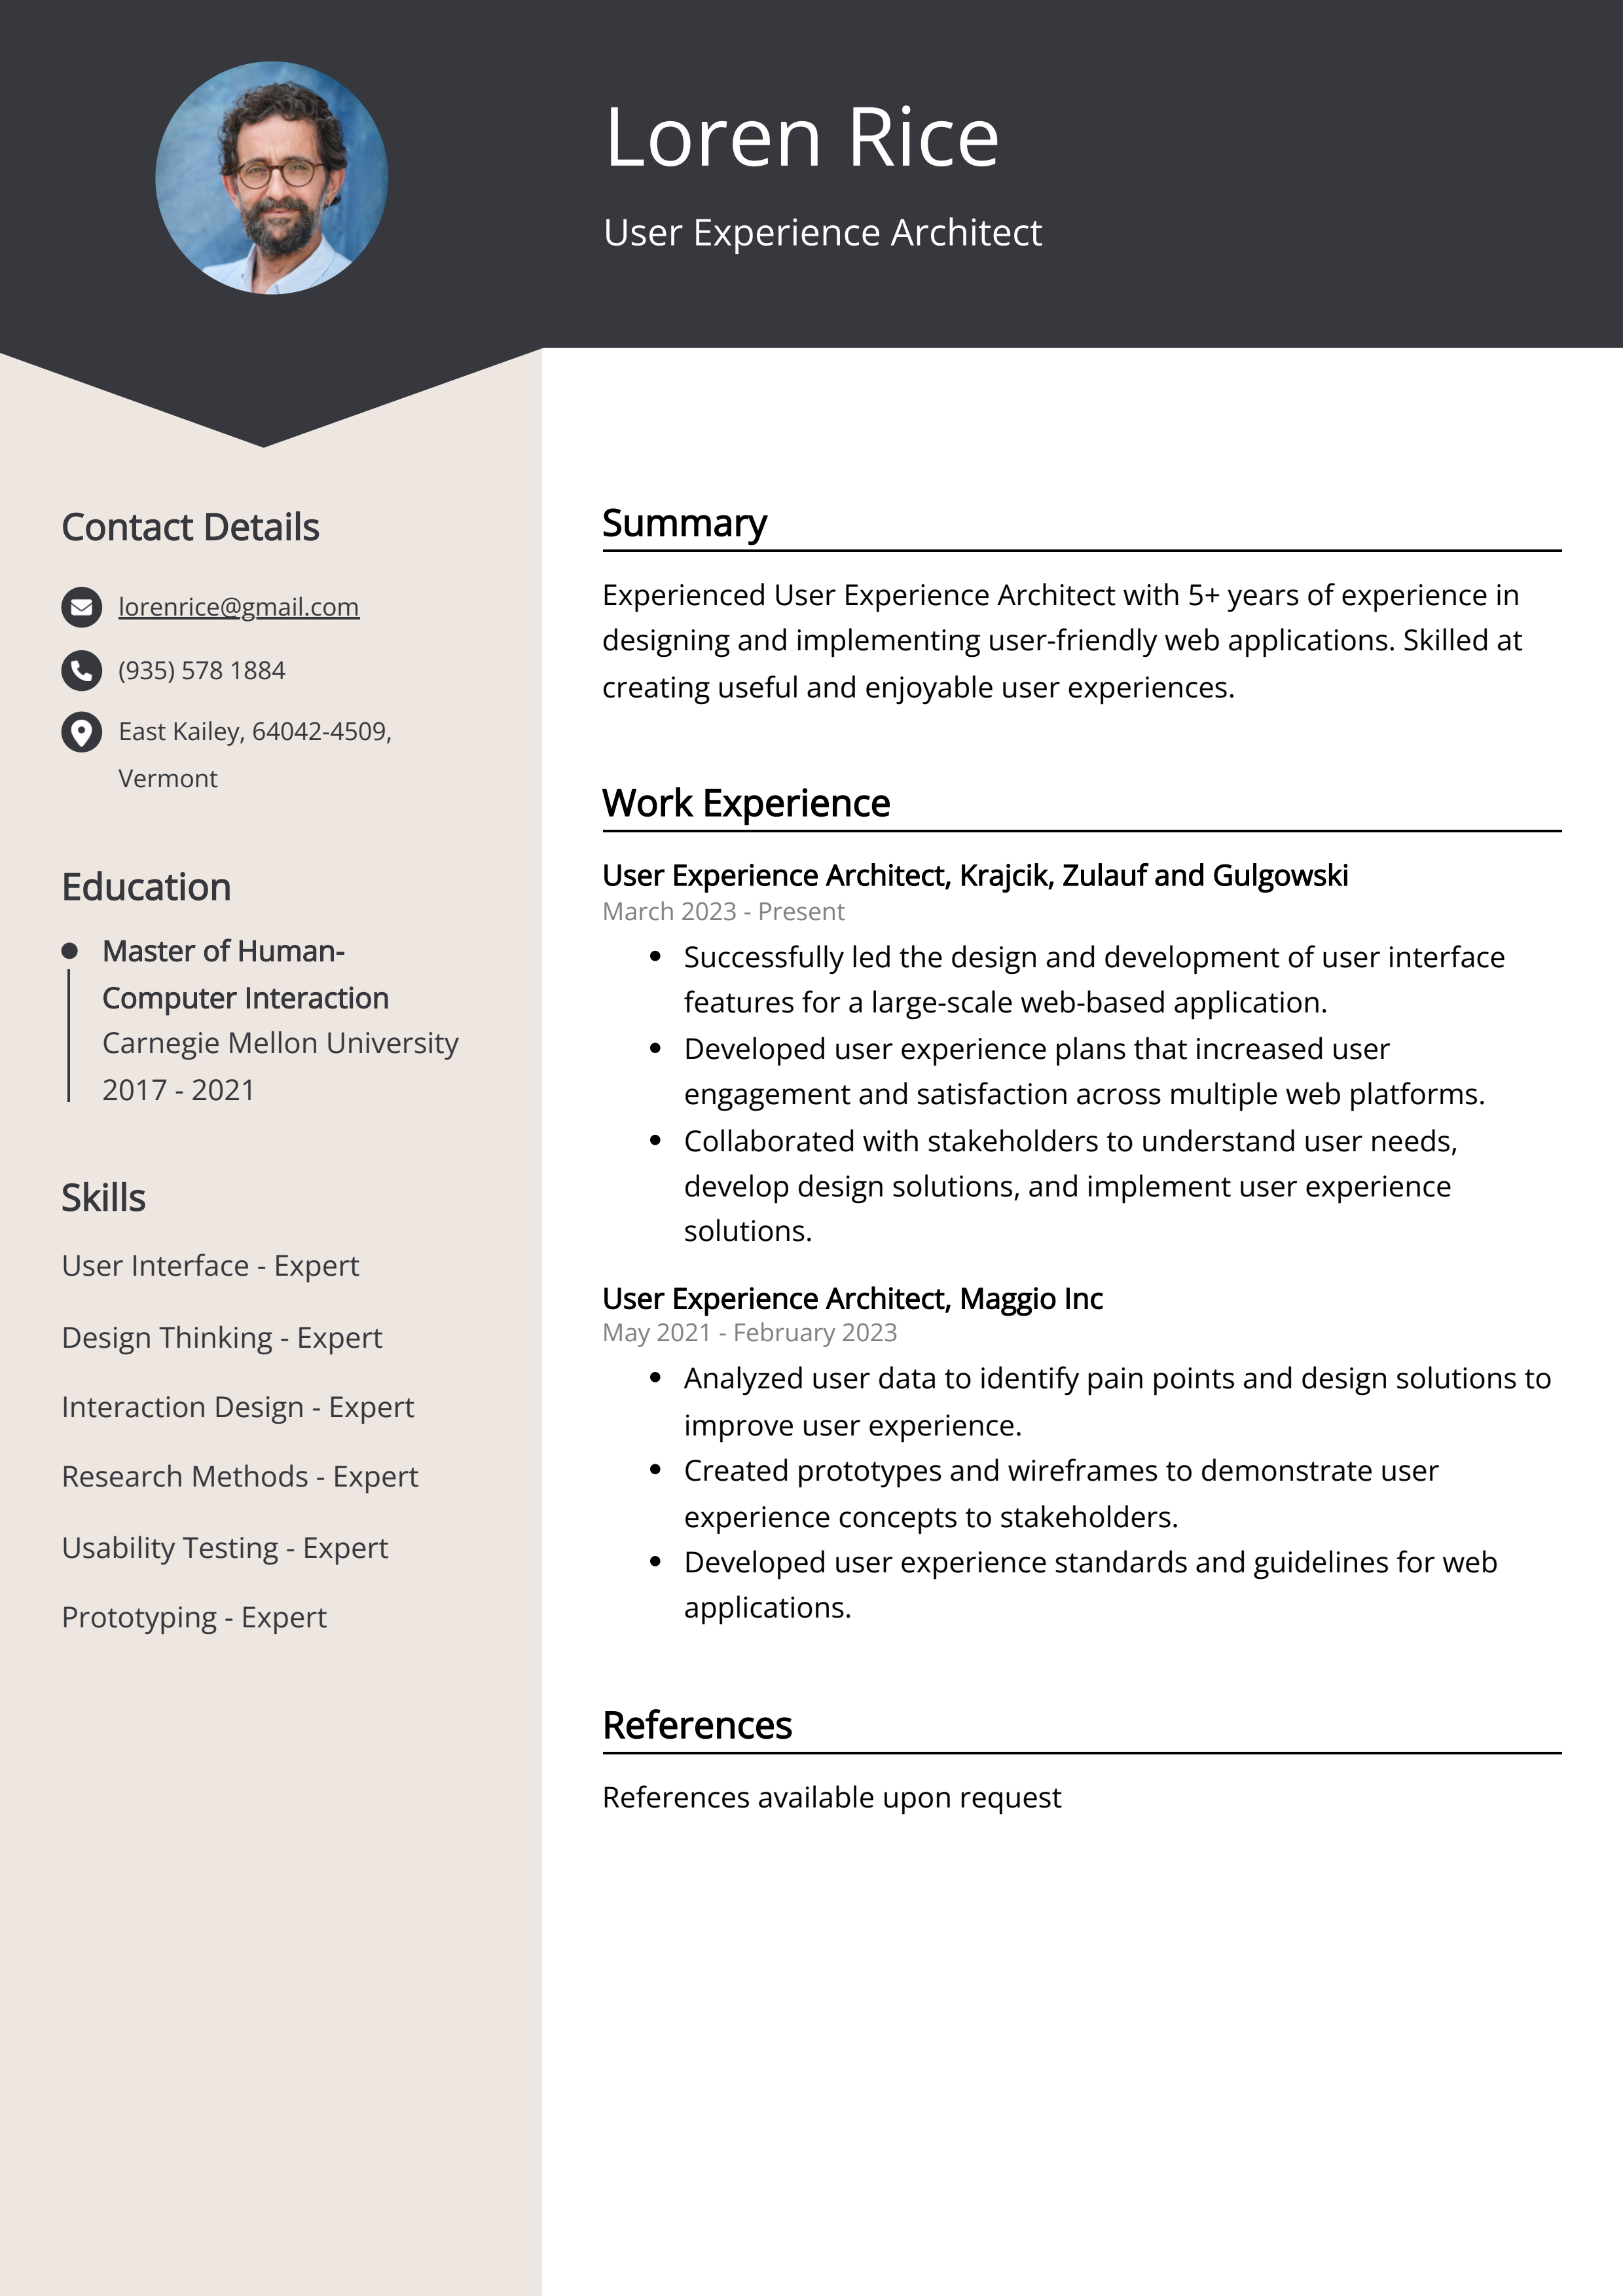 User Experience Architect CV Example